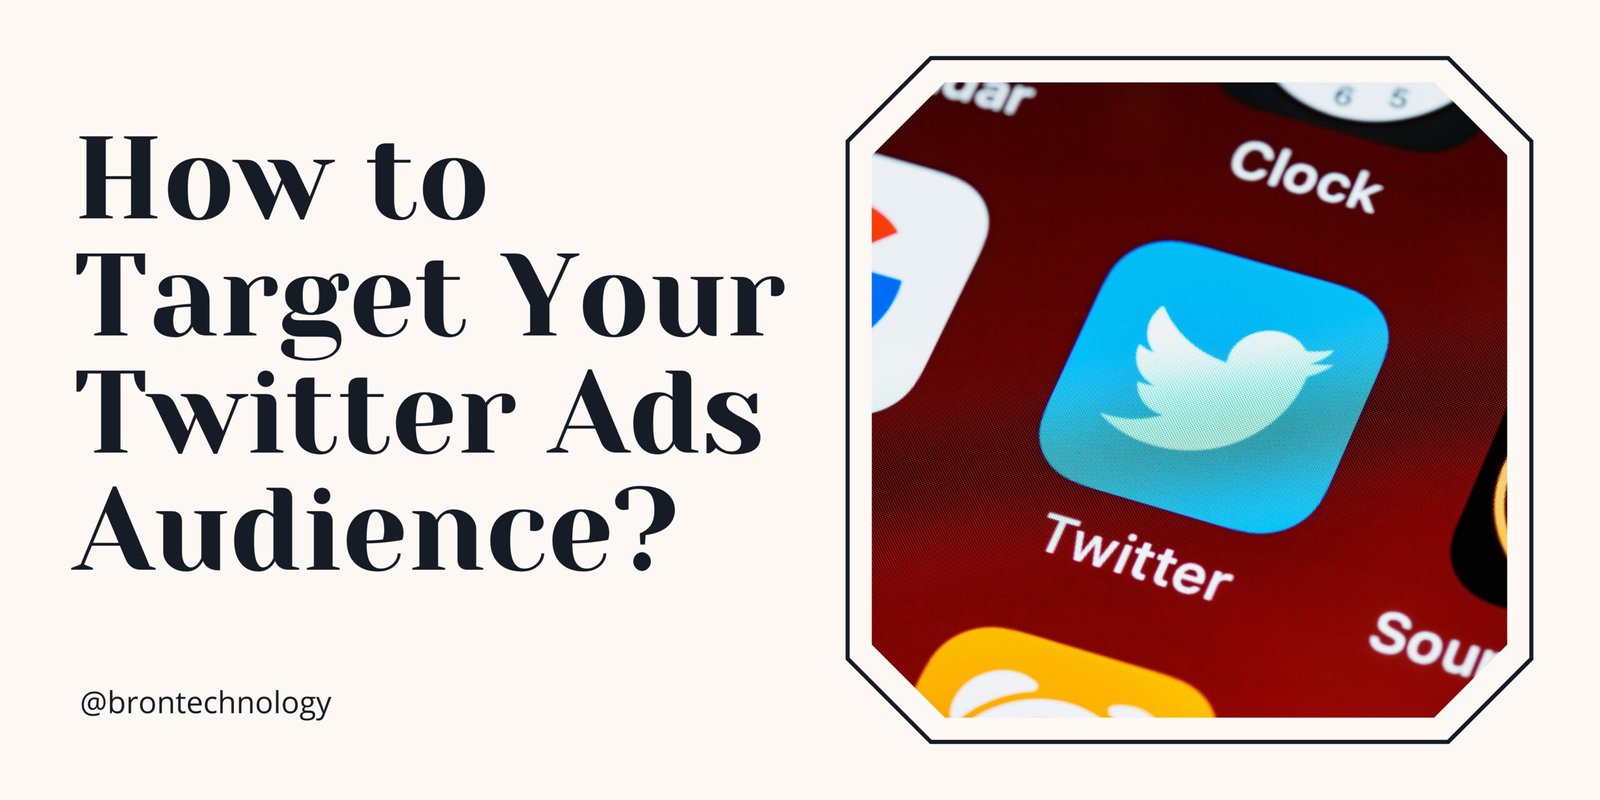 How to Target Your Twitter Ads Audience?